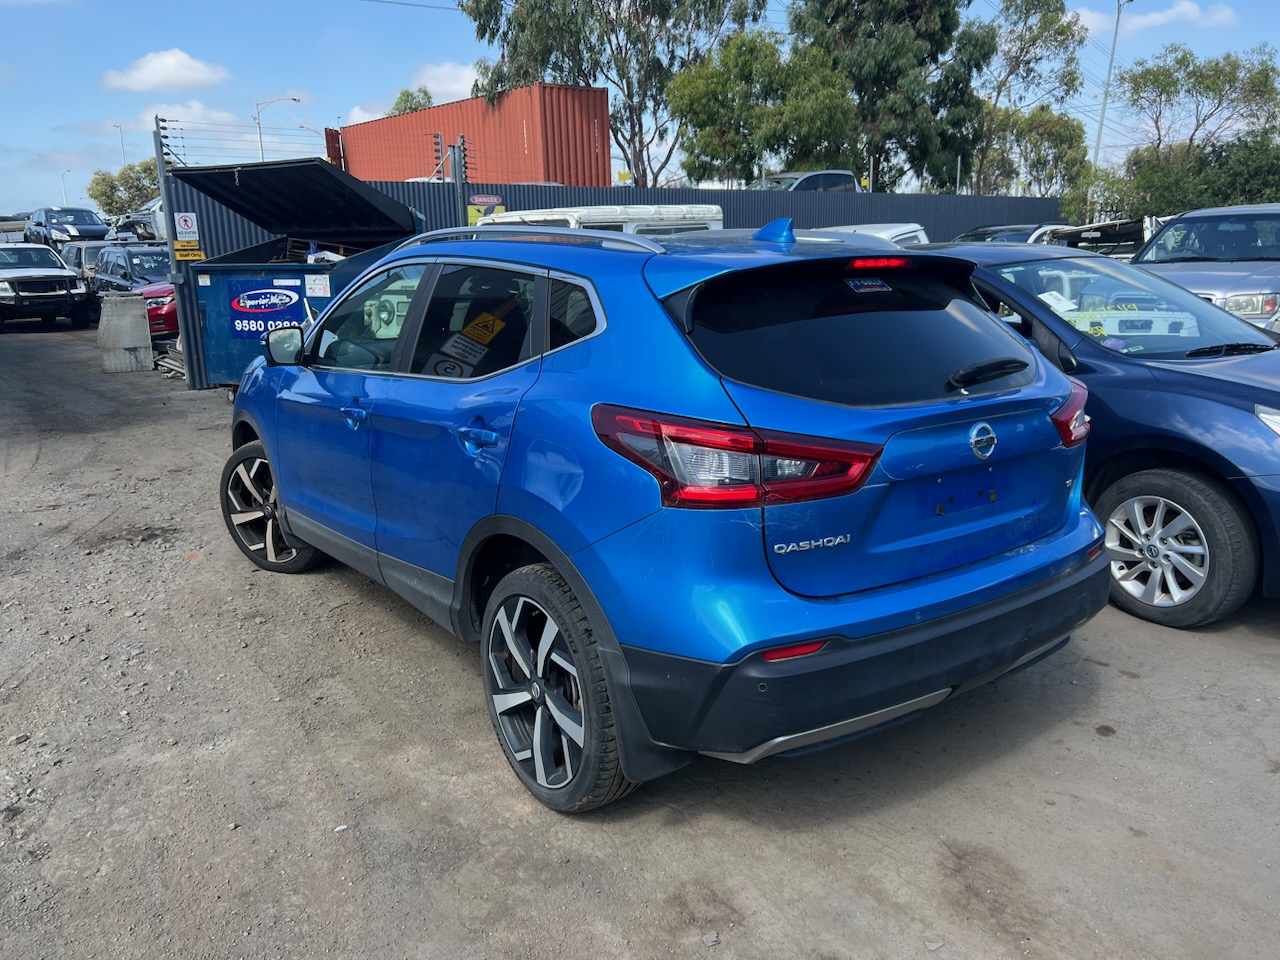 PARTS AVAILABLE FOR NISSAN QASHQAI J11 Ti 2018 SERIES 2 BLUE WRECKING